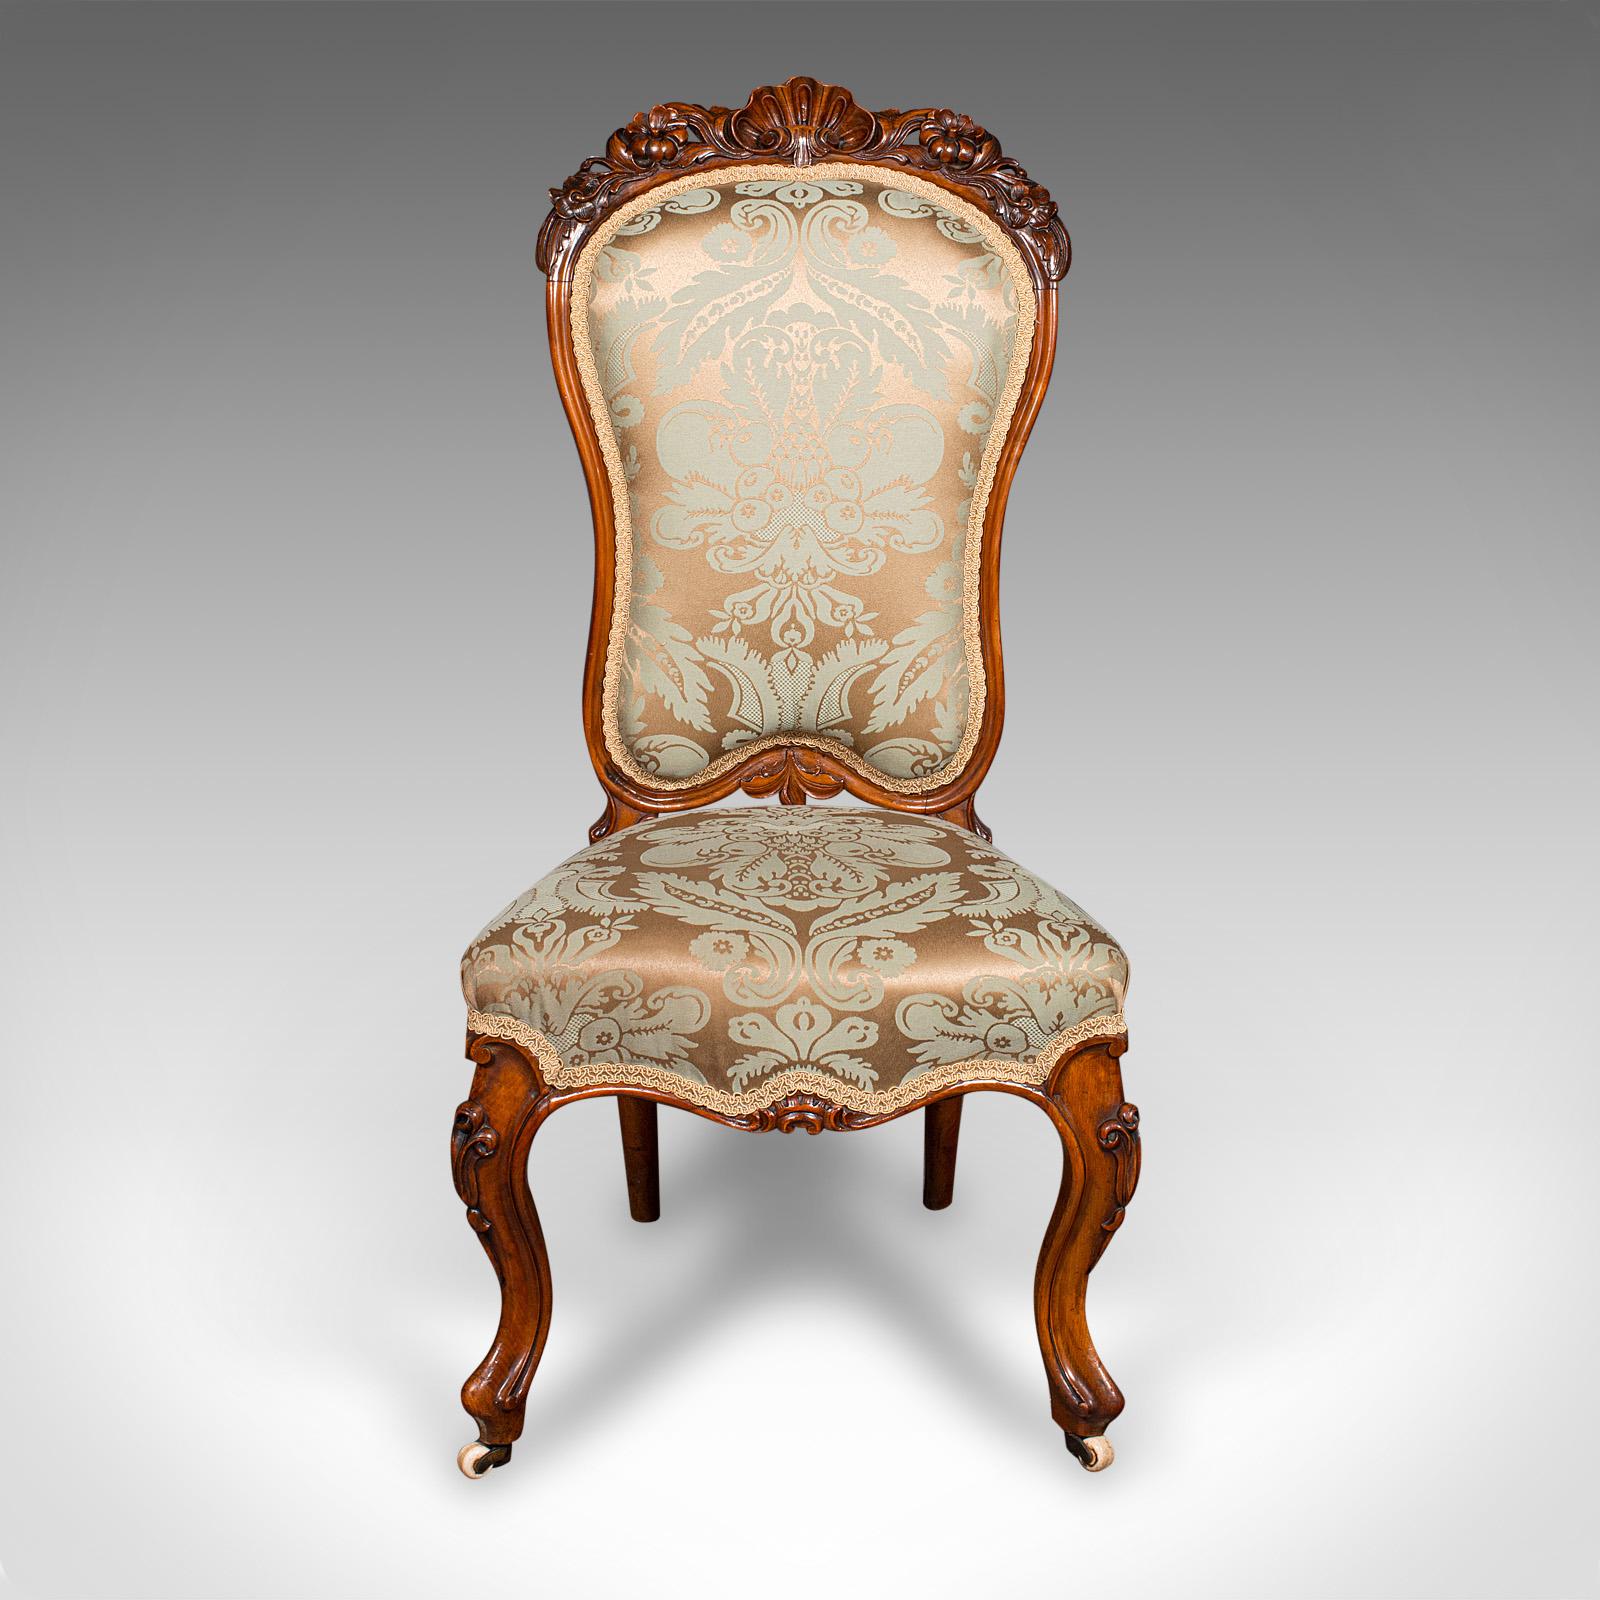 This is an antique drawing room chair. An English, walnut ladies or side seat, dating to the early Victorian period, circa 1840.

Delightfully upholstered chair with a fine decorative appearance
Displays a desirable aged patina and in very good